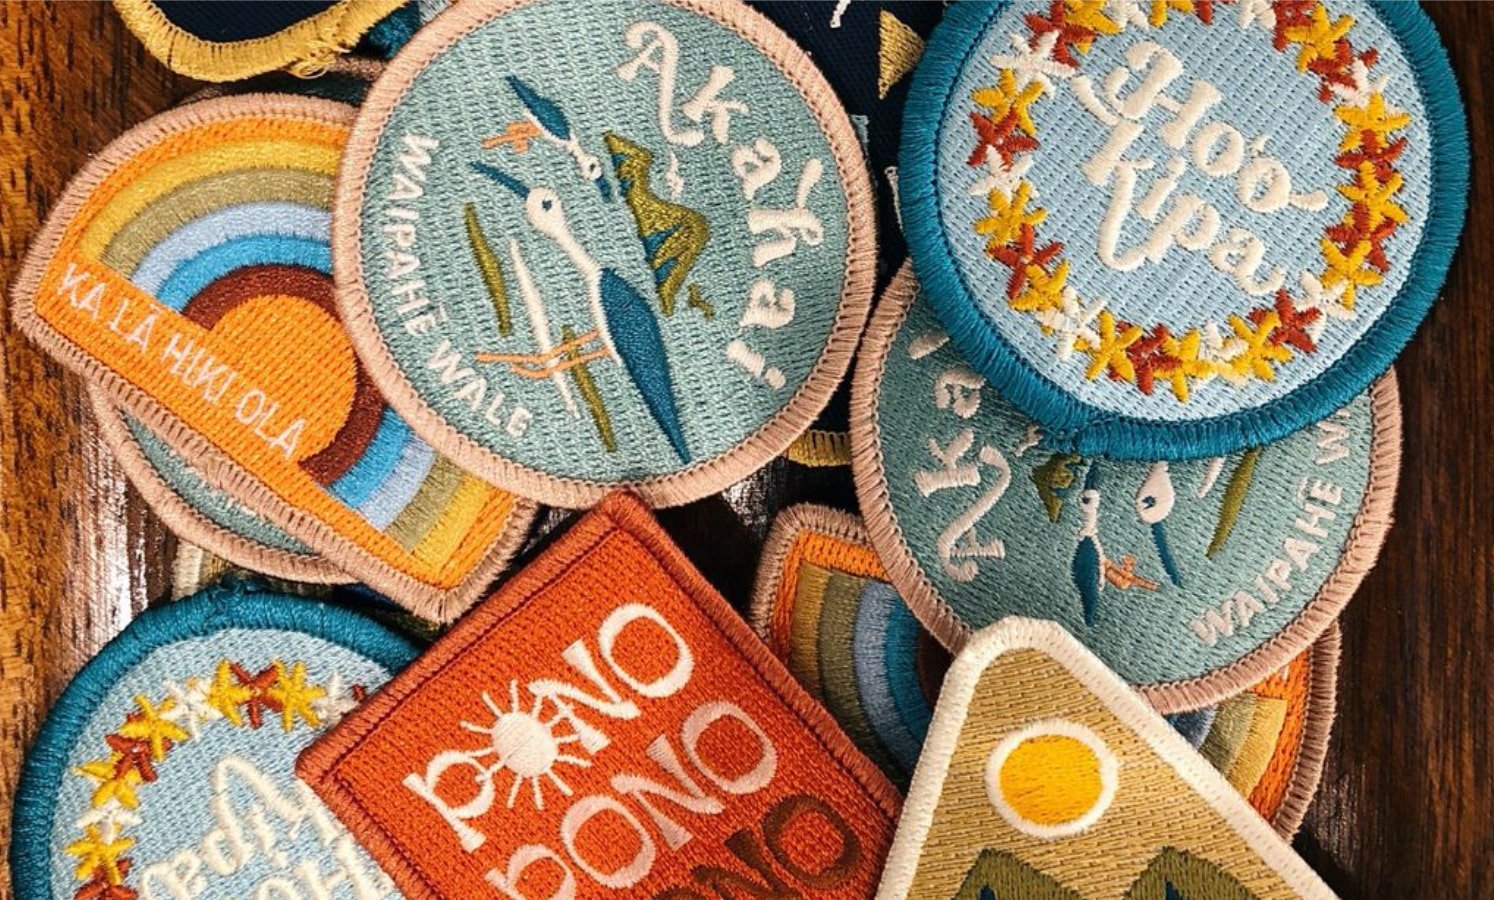 100% of Profits from Values Patches to Benefit Hawai'i Nonprofits